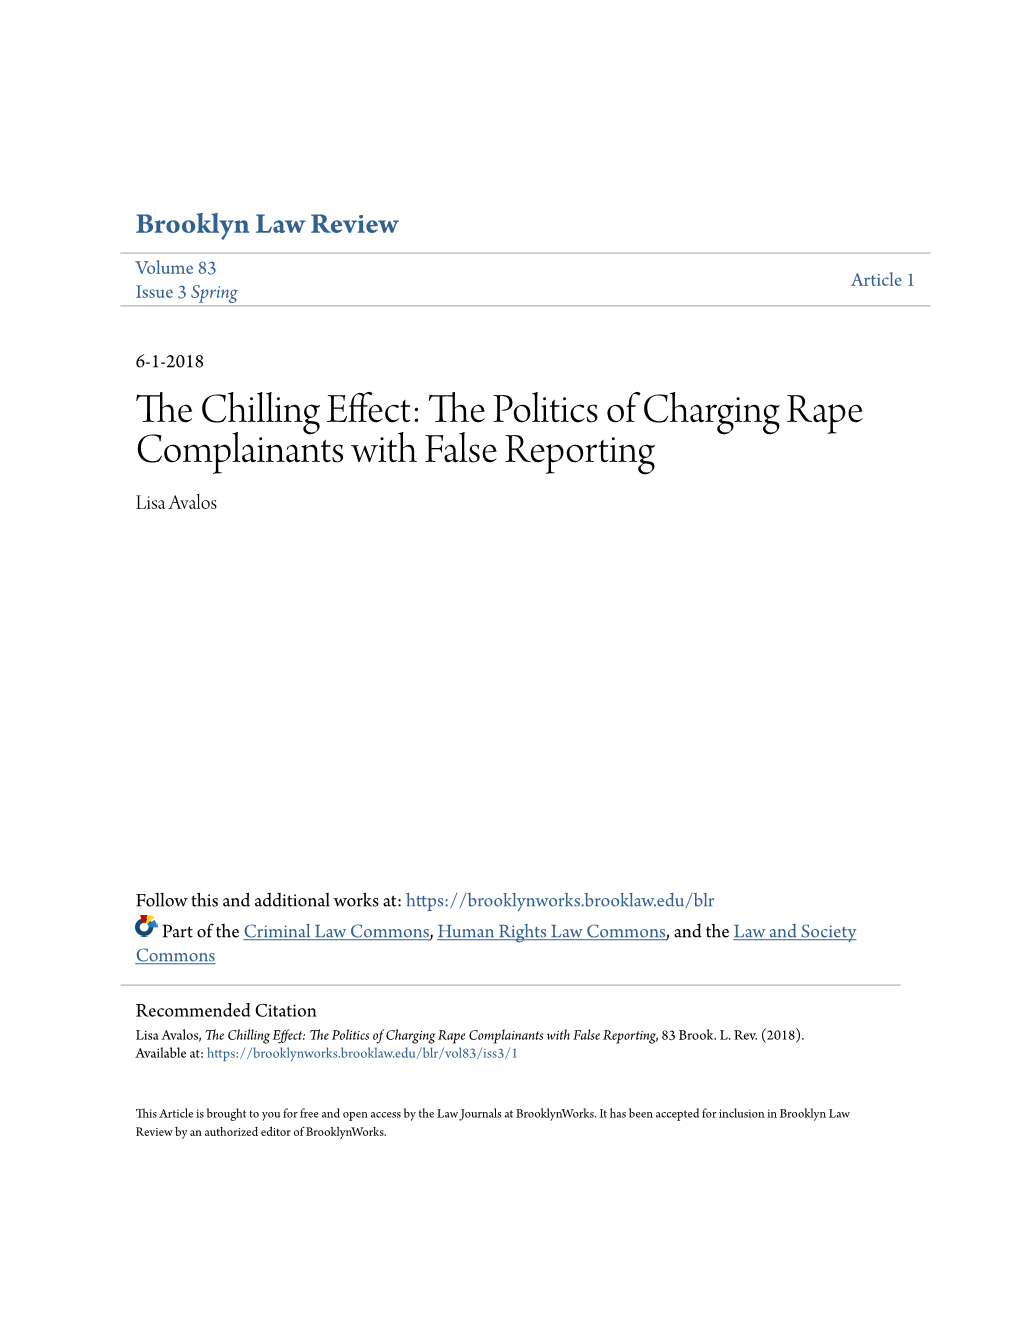 The Chilling Effect: the Politics of Charging Rape Complainants with False Reporting, 83 Brook